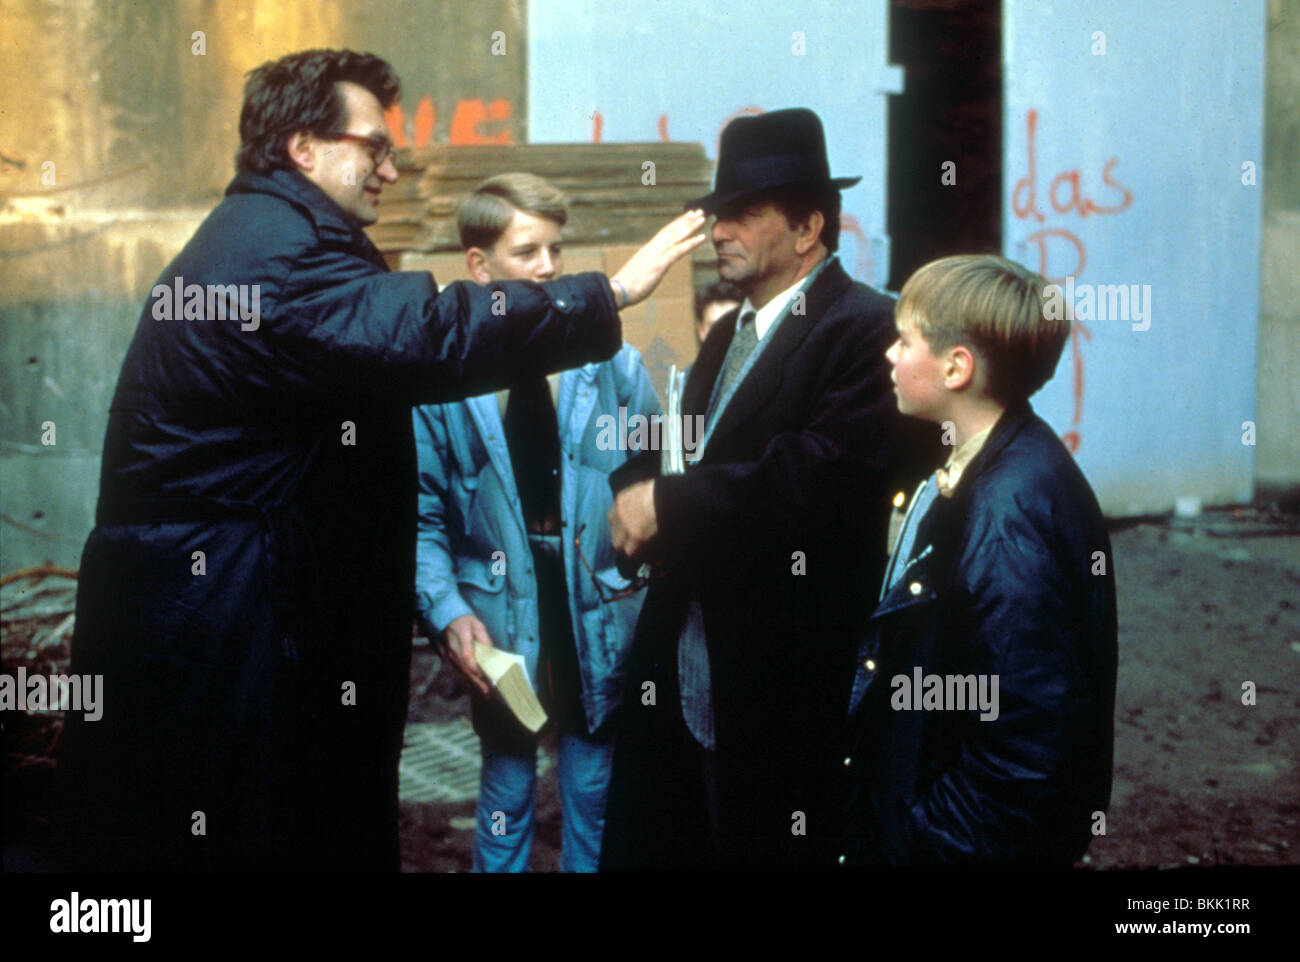 WIM WENDERS (DIR) O/S 'WINGS OF DESIRE' WITH PETER FALK WIMW 003 Stock  Photo - Alamy